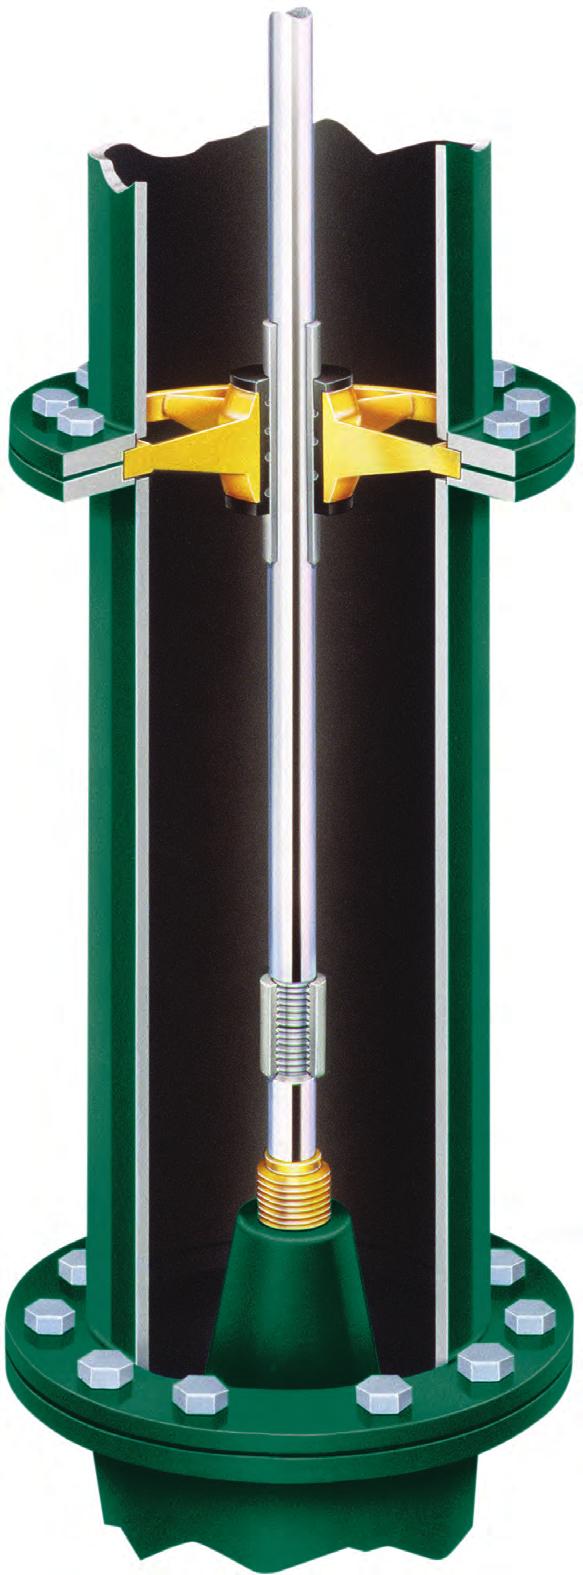 Column and Lineshaft Assemblies Threaded steel discharge column is available in standard sizes through 14" diameter.